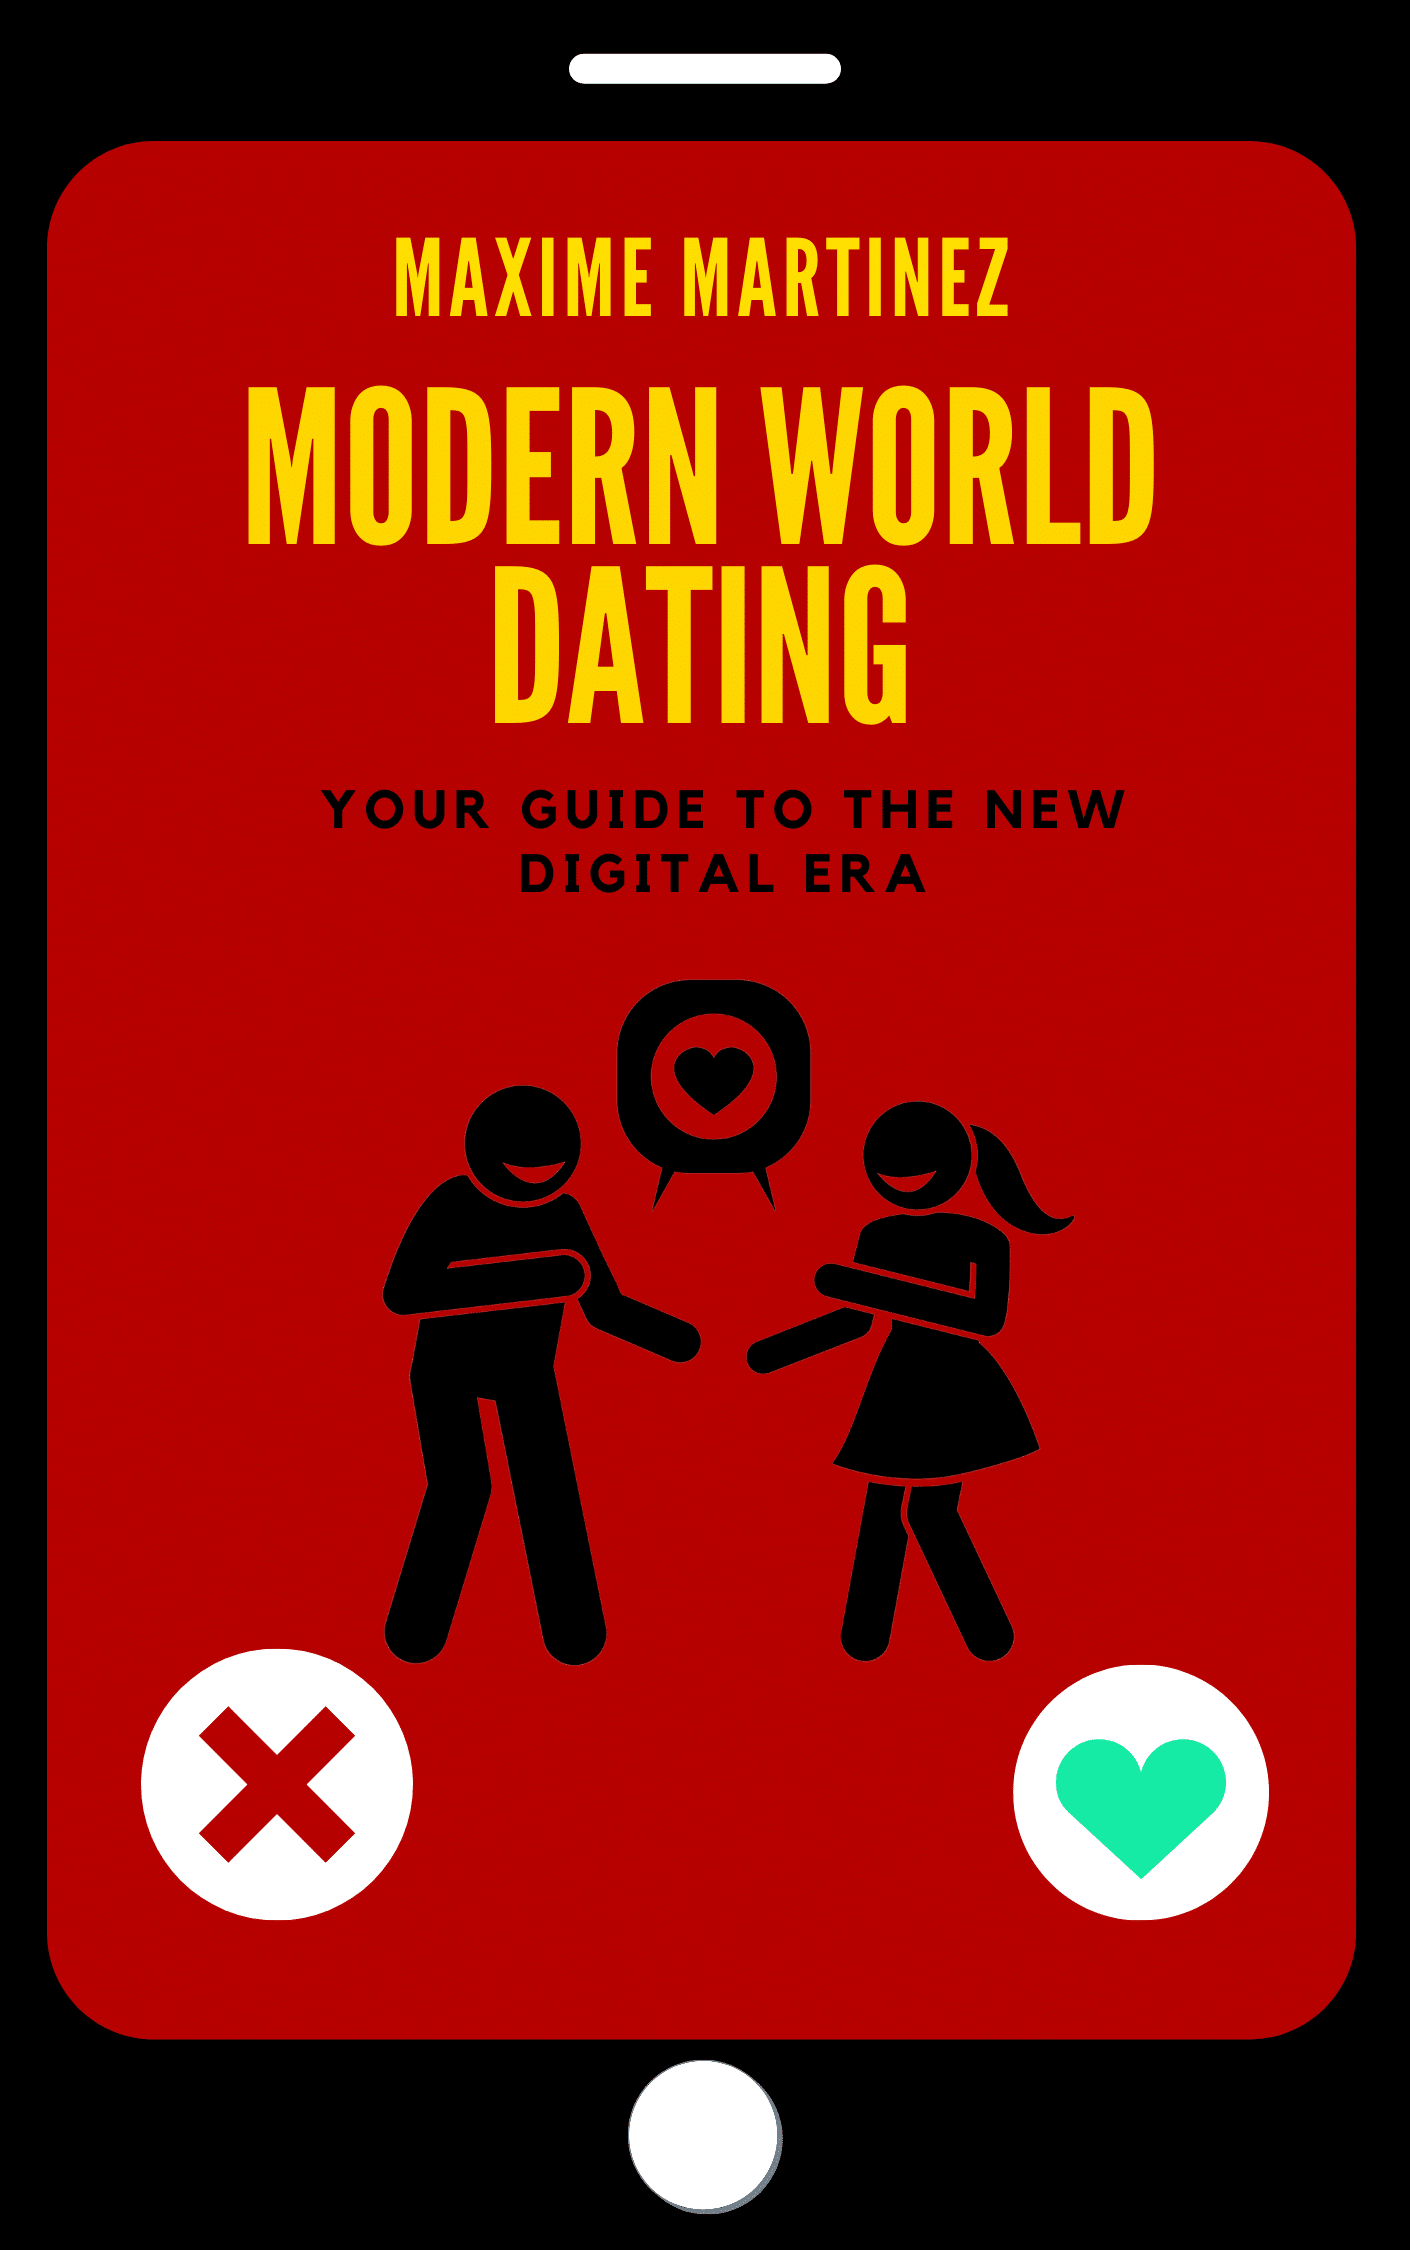 Modern World Dating: Your Guide To The New Digital Era, Maxime Martinez